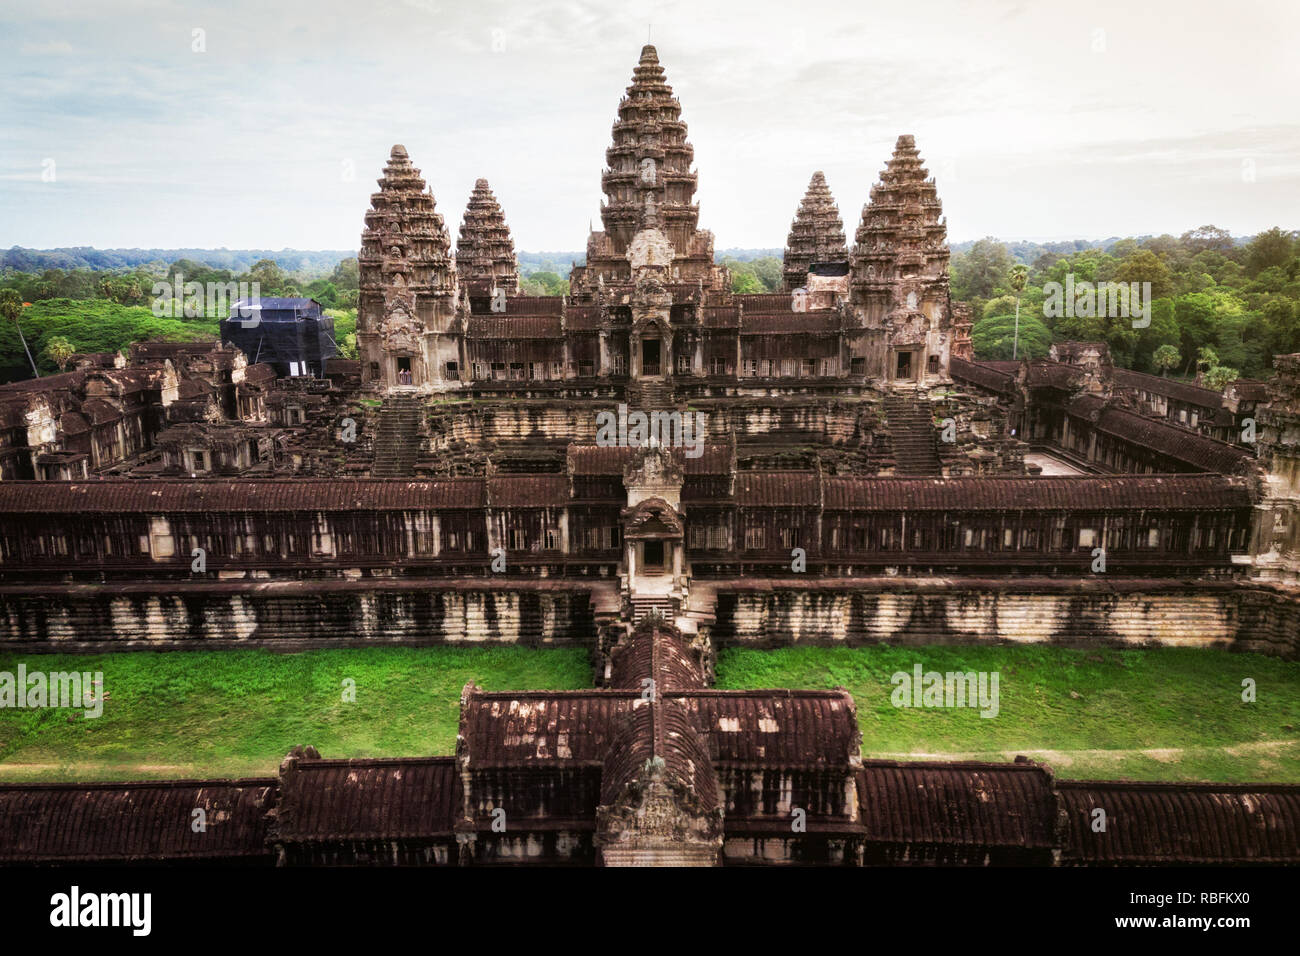 Aerial view of Angkor Wat temple, Siem Reap, Cambodia. Stock Photo